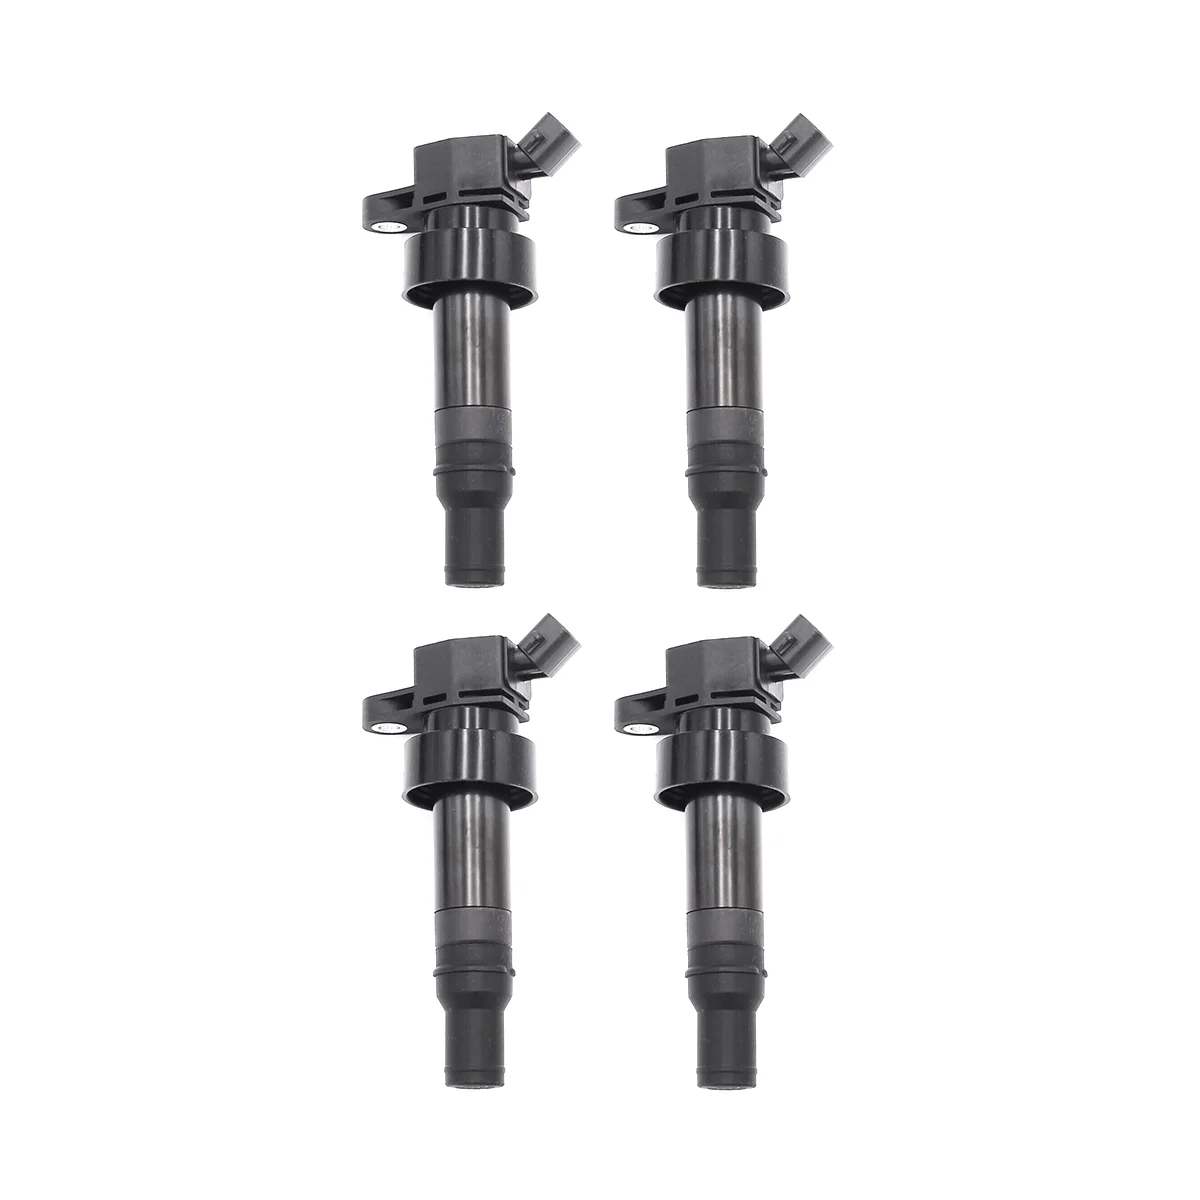 

New 4PCS Ignition Coils Fit for 13-17 Hyundai Veloster 2014-2017 Kia Forte5 Koup